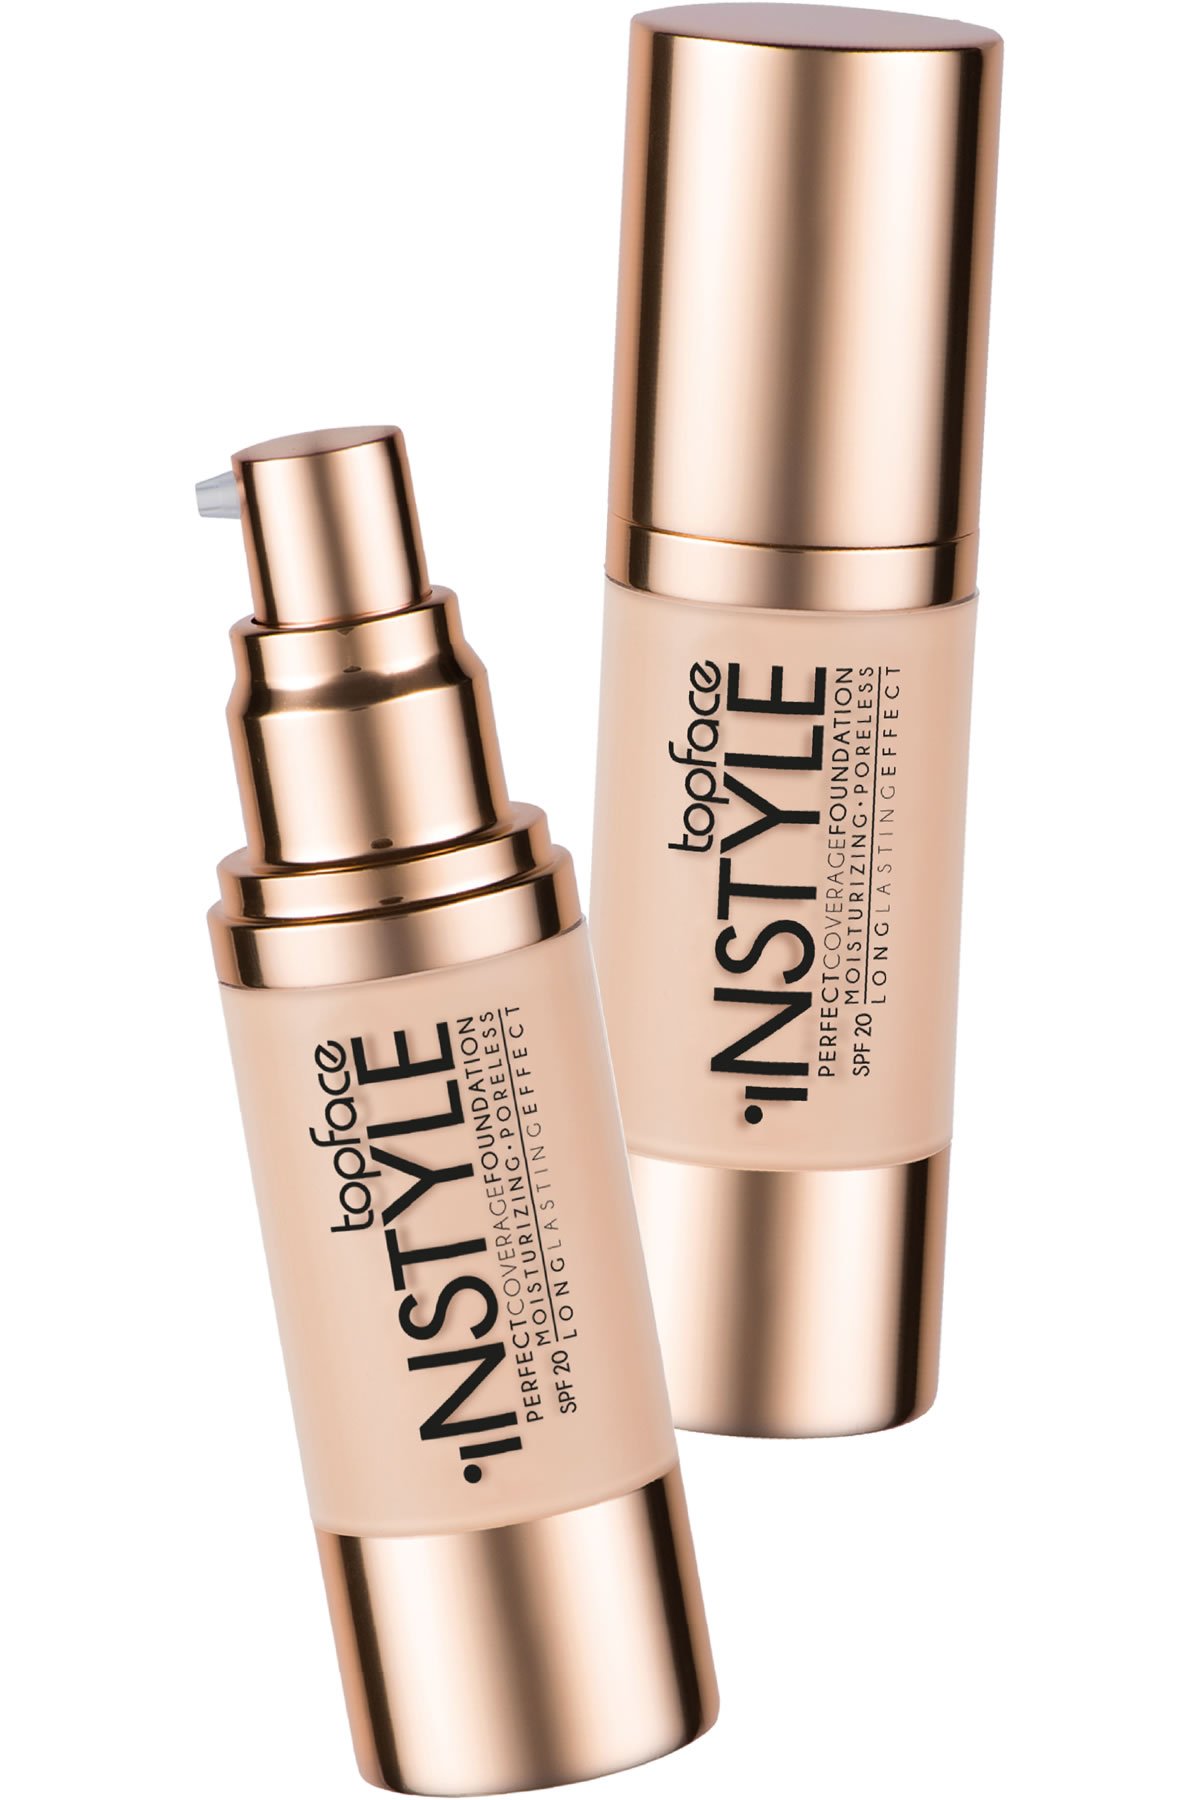 Instyle Perfect Coverage Foundation - topfaceegypt